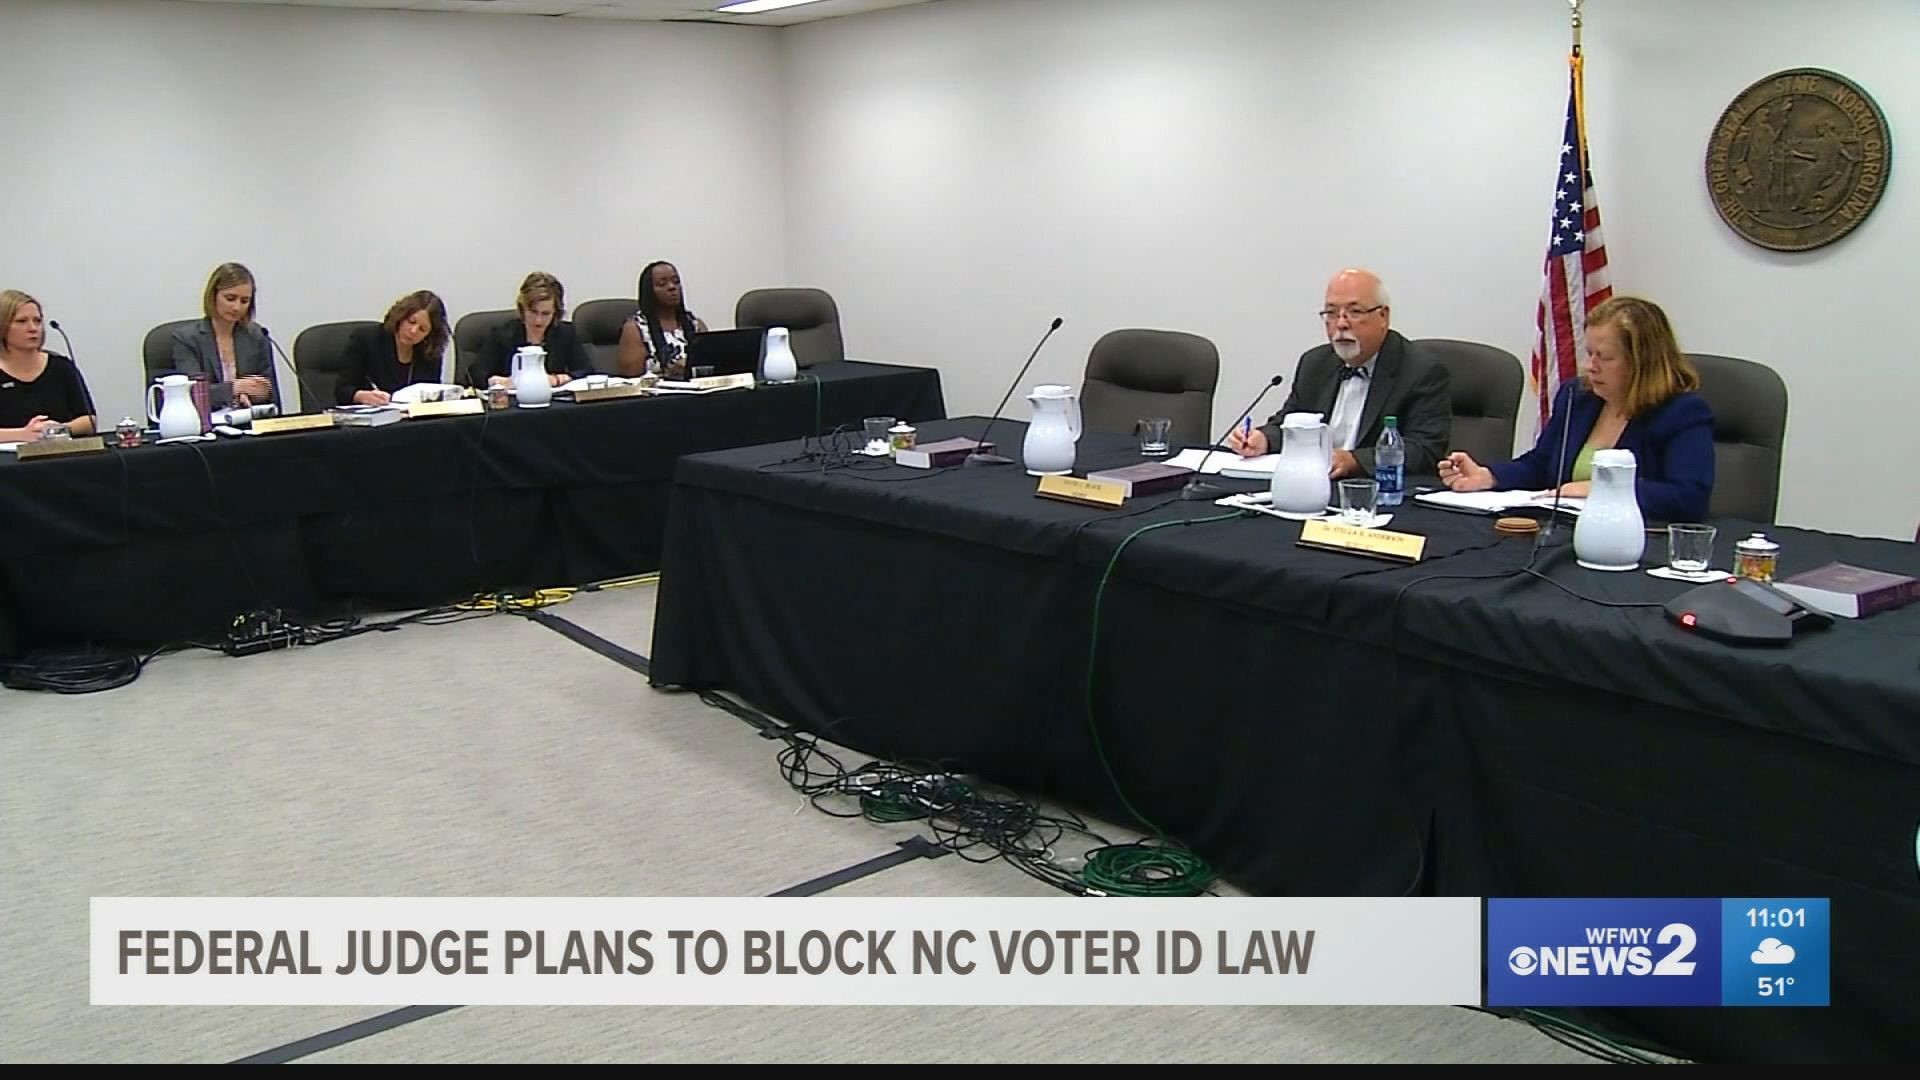 The North Carolina Board of Elections was planning to mail out 12-pages-worth of photo ID information statewide to voters. A Federal Judge plans to block the law.